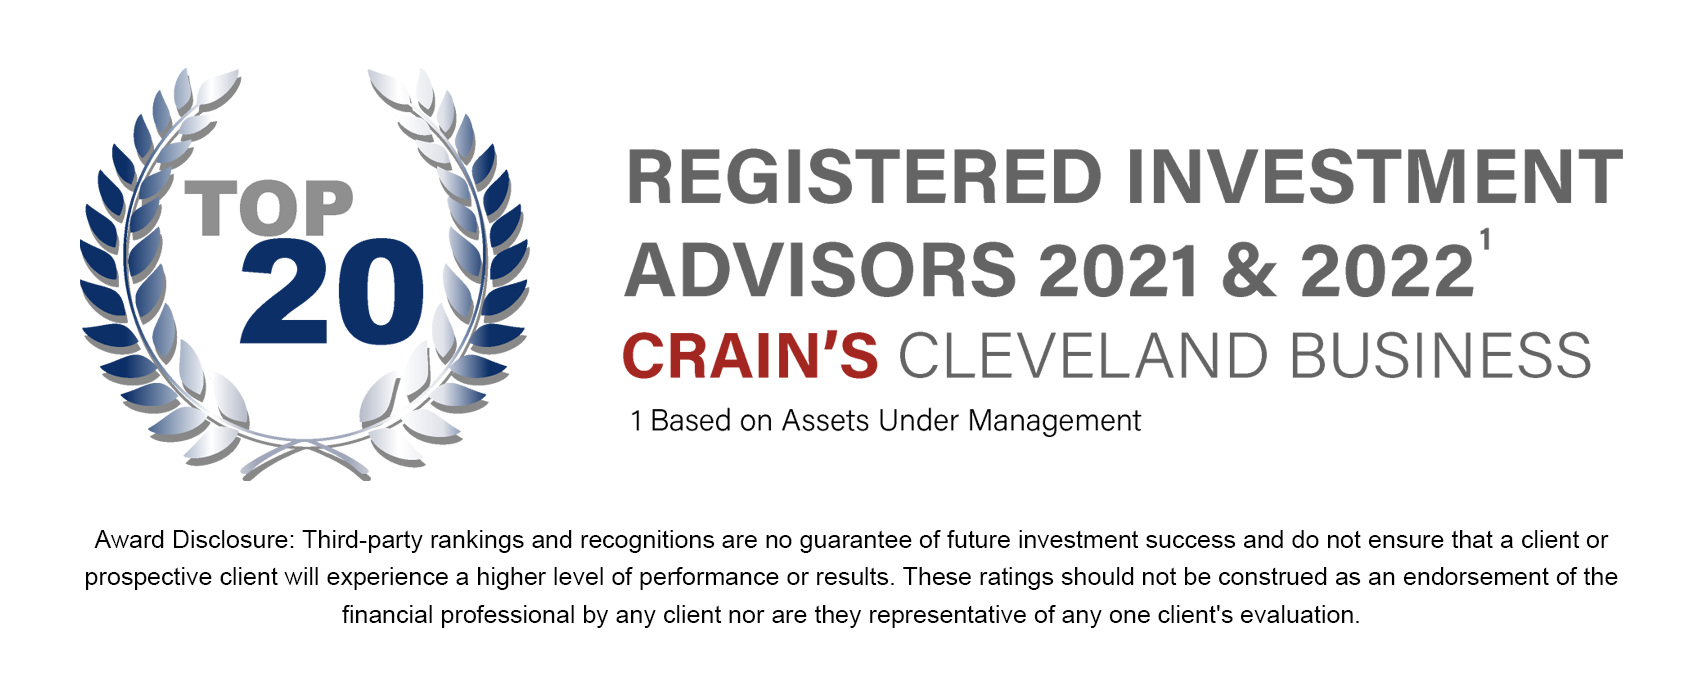 Lineweaver Wealth Advisors Excited To Be Part of Crains Top Advisors Again